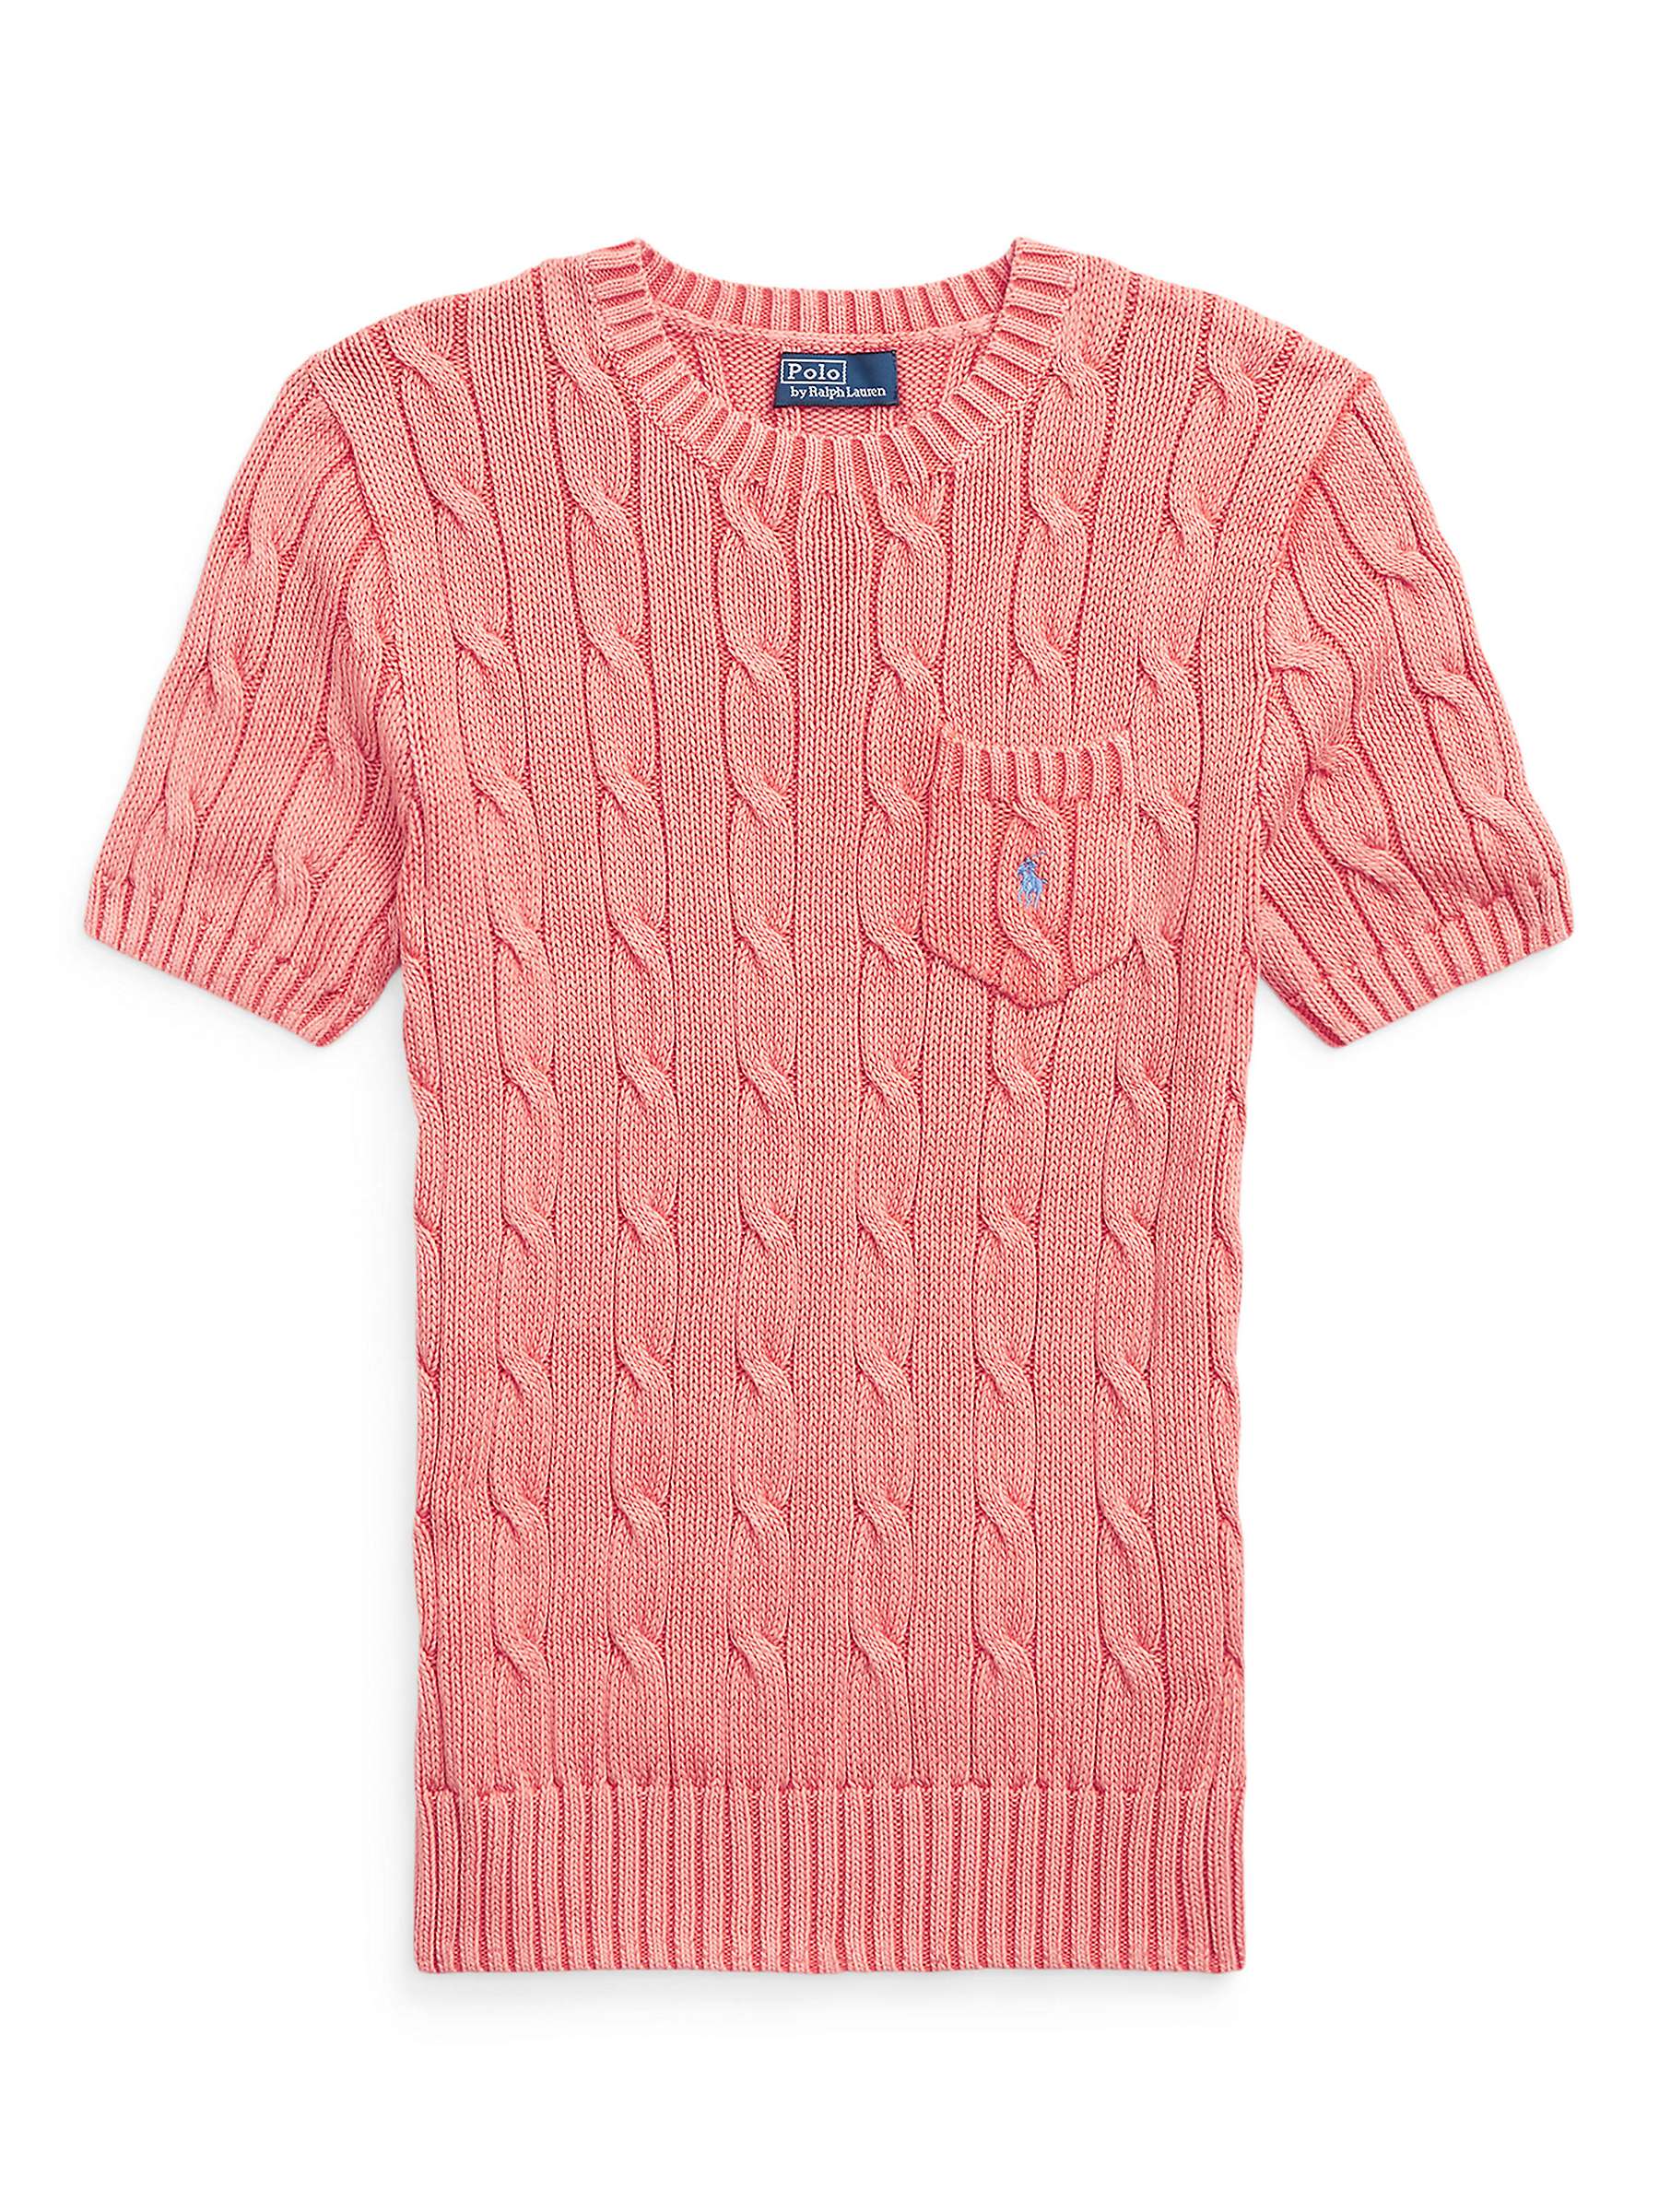 Buy Polo Ralph Lauren Cable Knit Short Sleeve Jumper, Cotton Rose Online at johnlewis.com